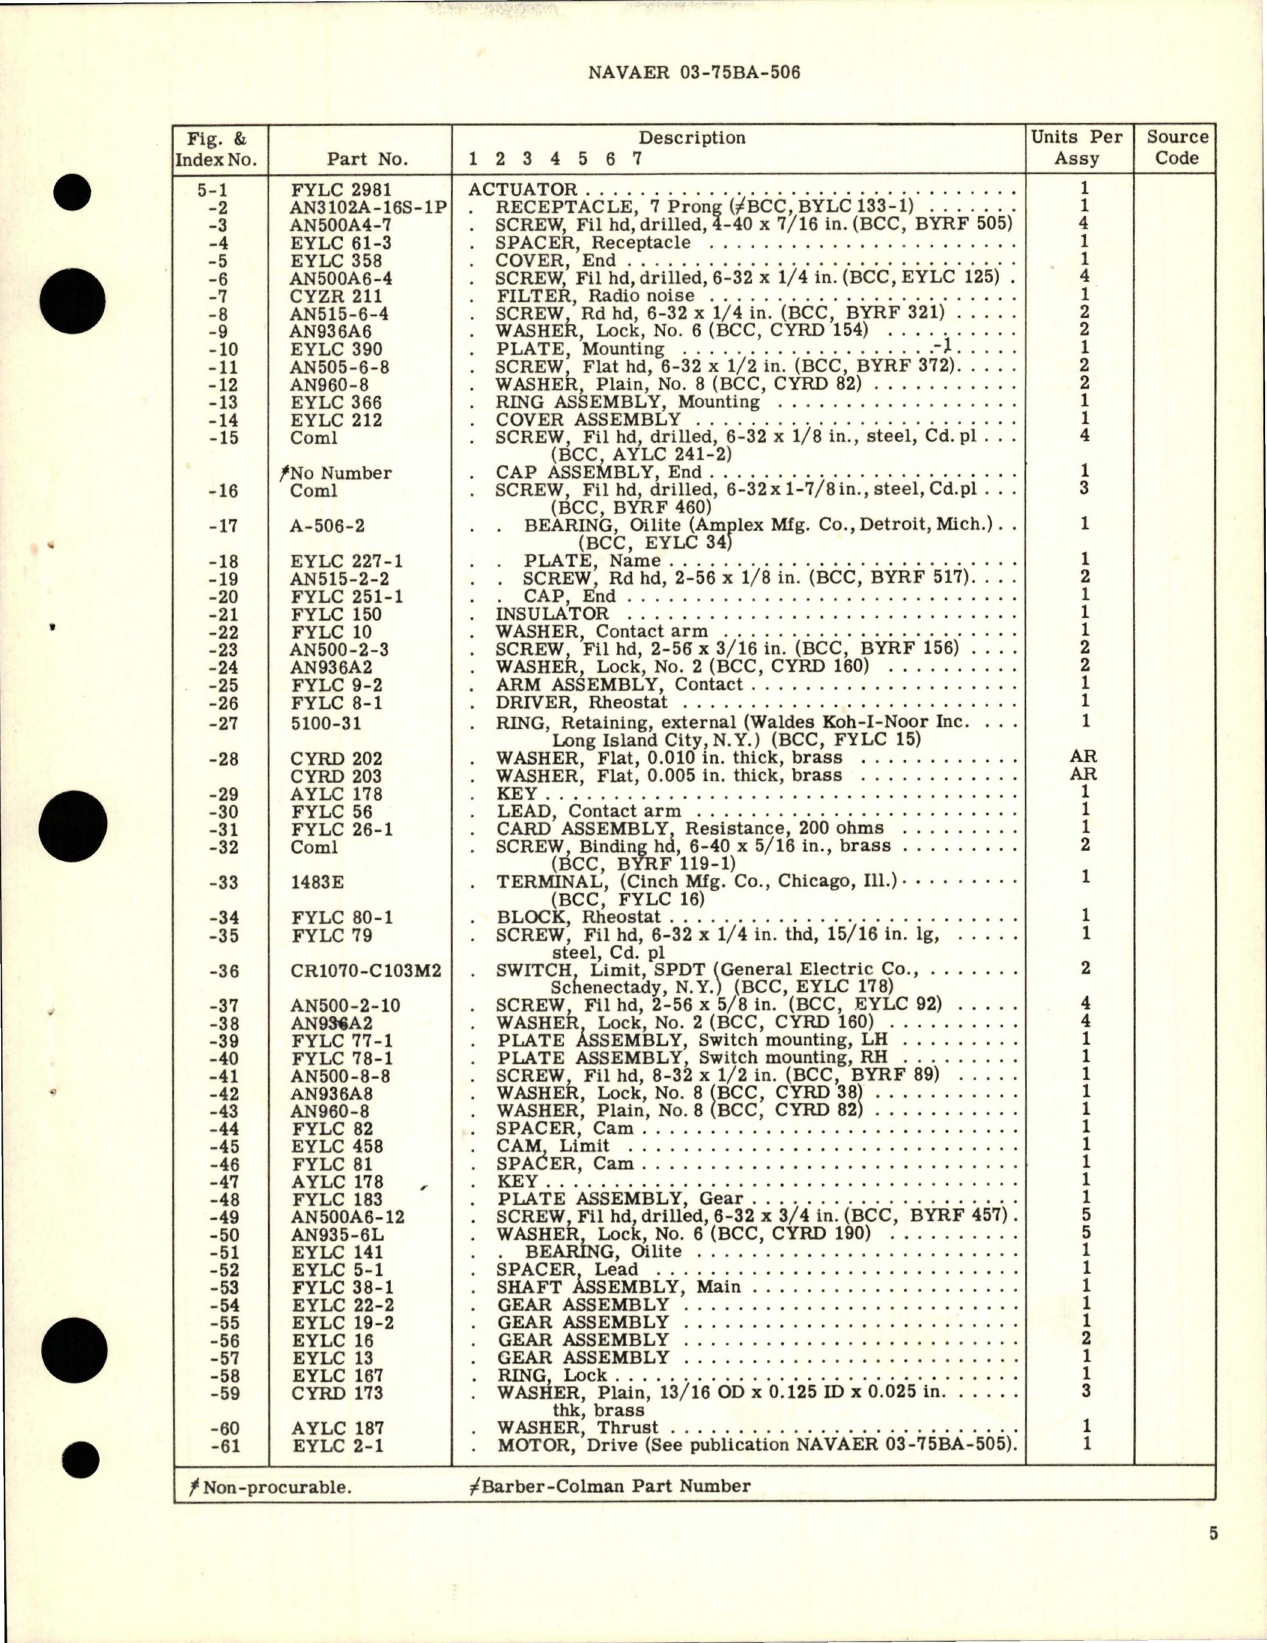 Sample page 5 from AirCorps Library document: Overhaul Instructions with Parts Breakdown for Aircraft Actuator - FYLC 2981